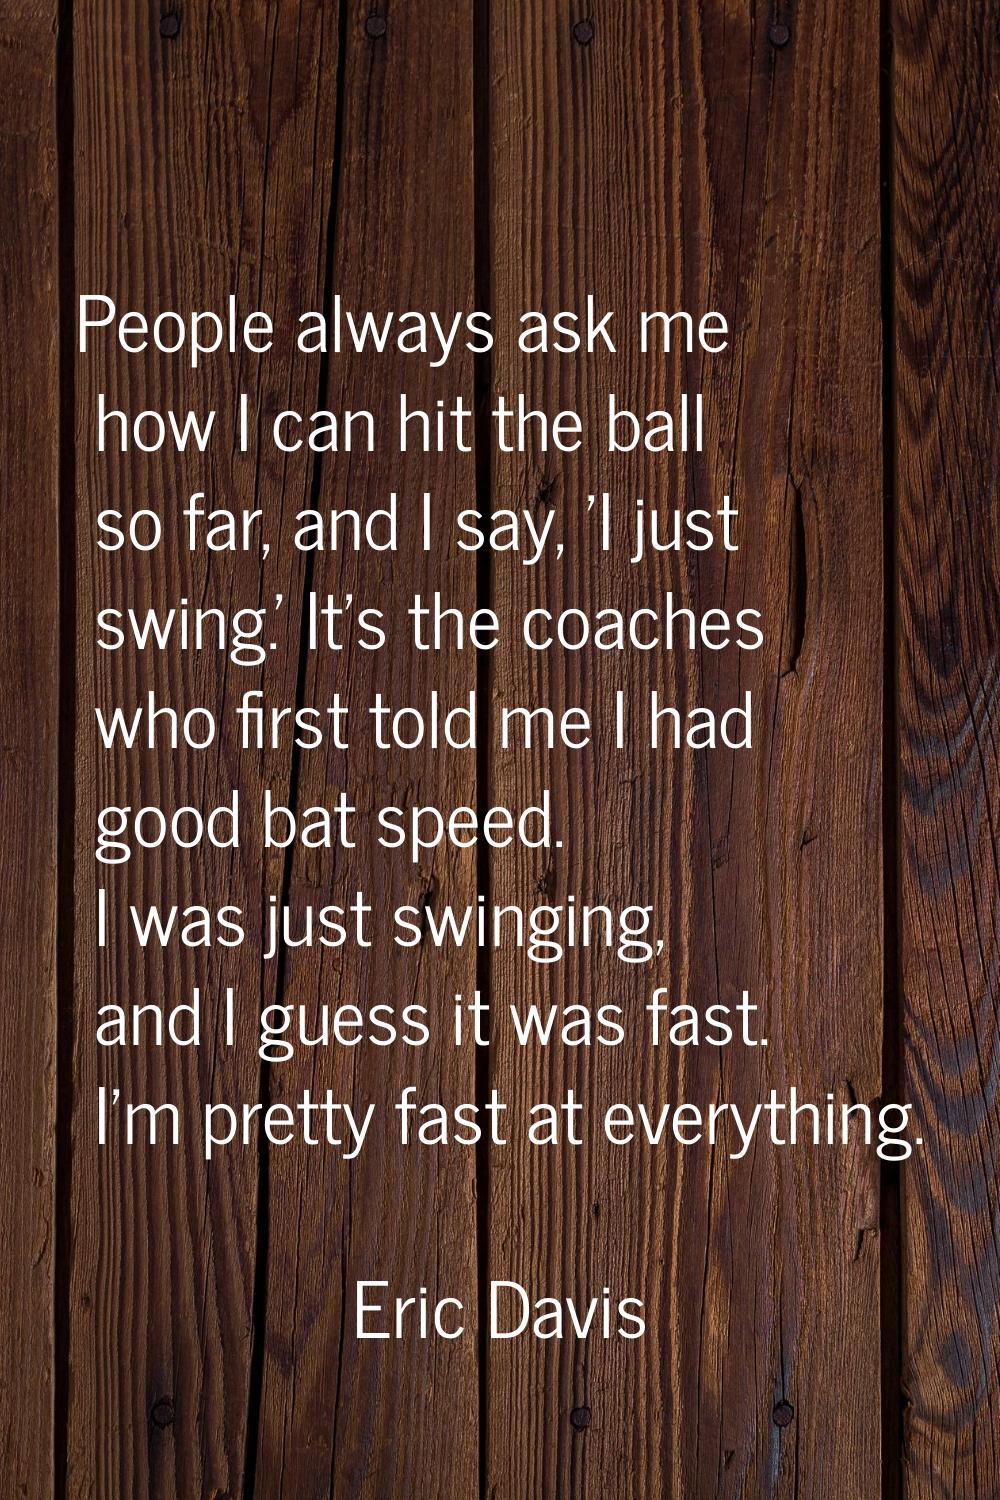 People always ask me how I can hit the ball so far, and I say, 'I just swing.' It's the coaches who